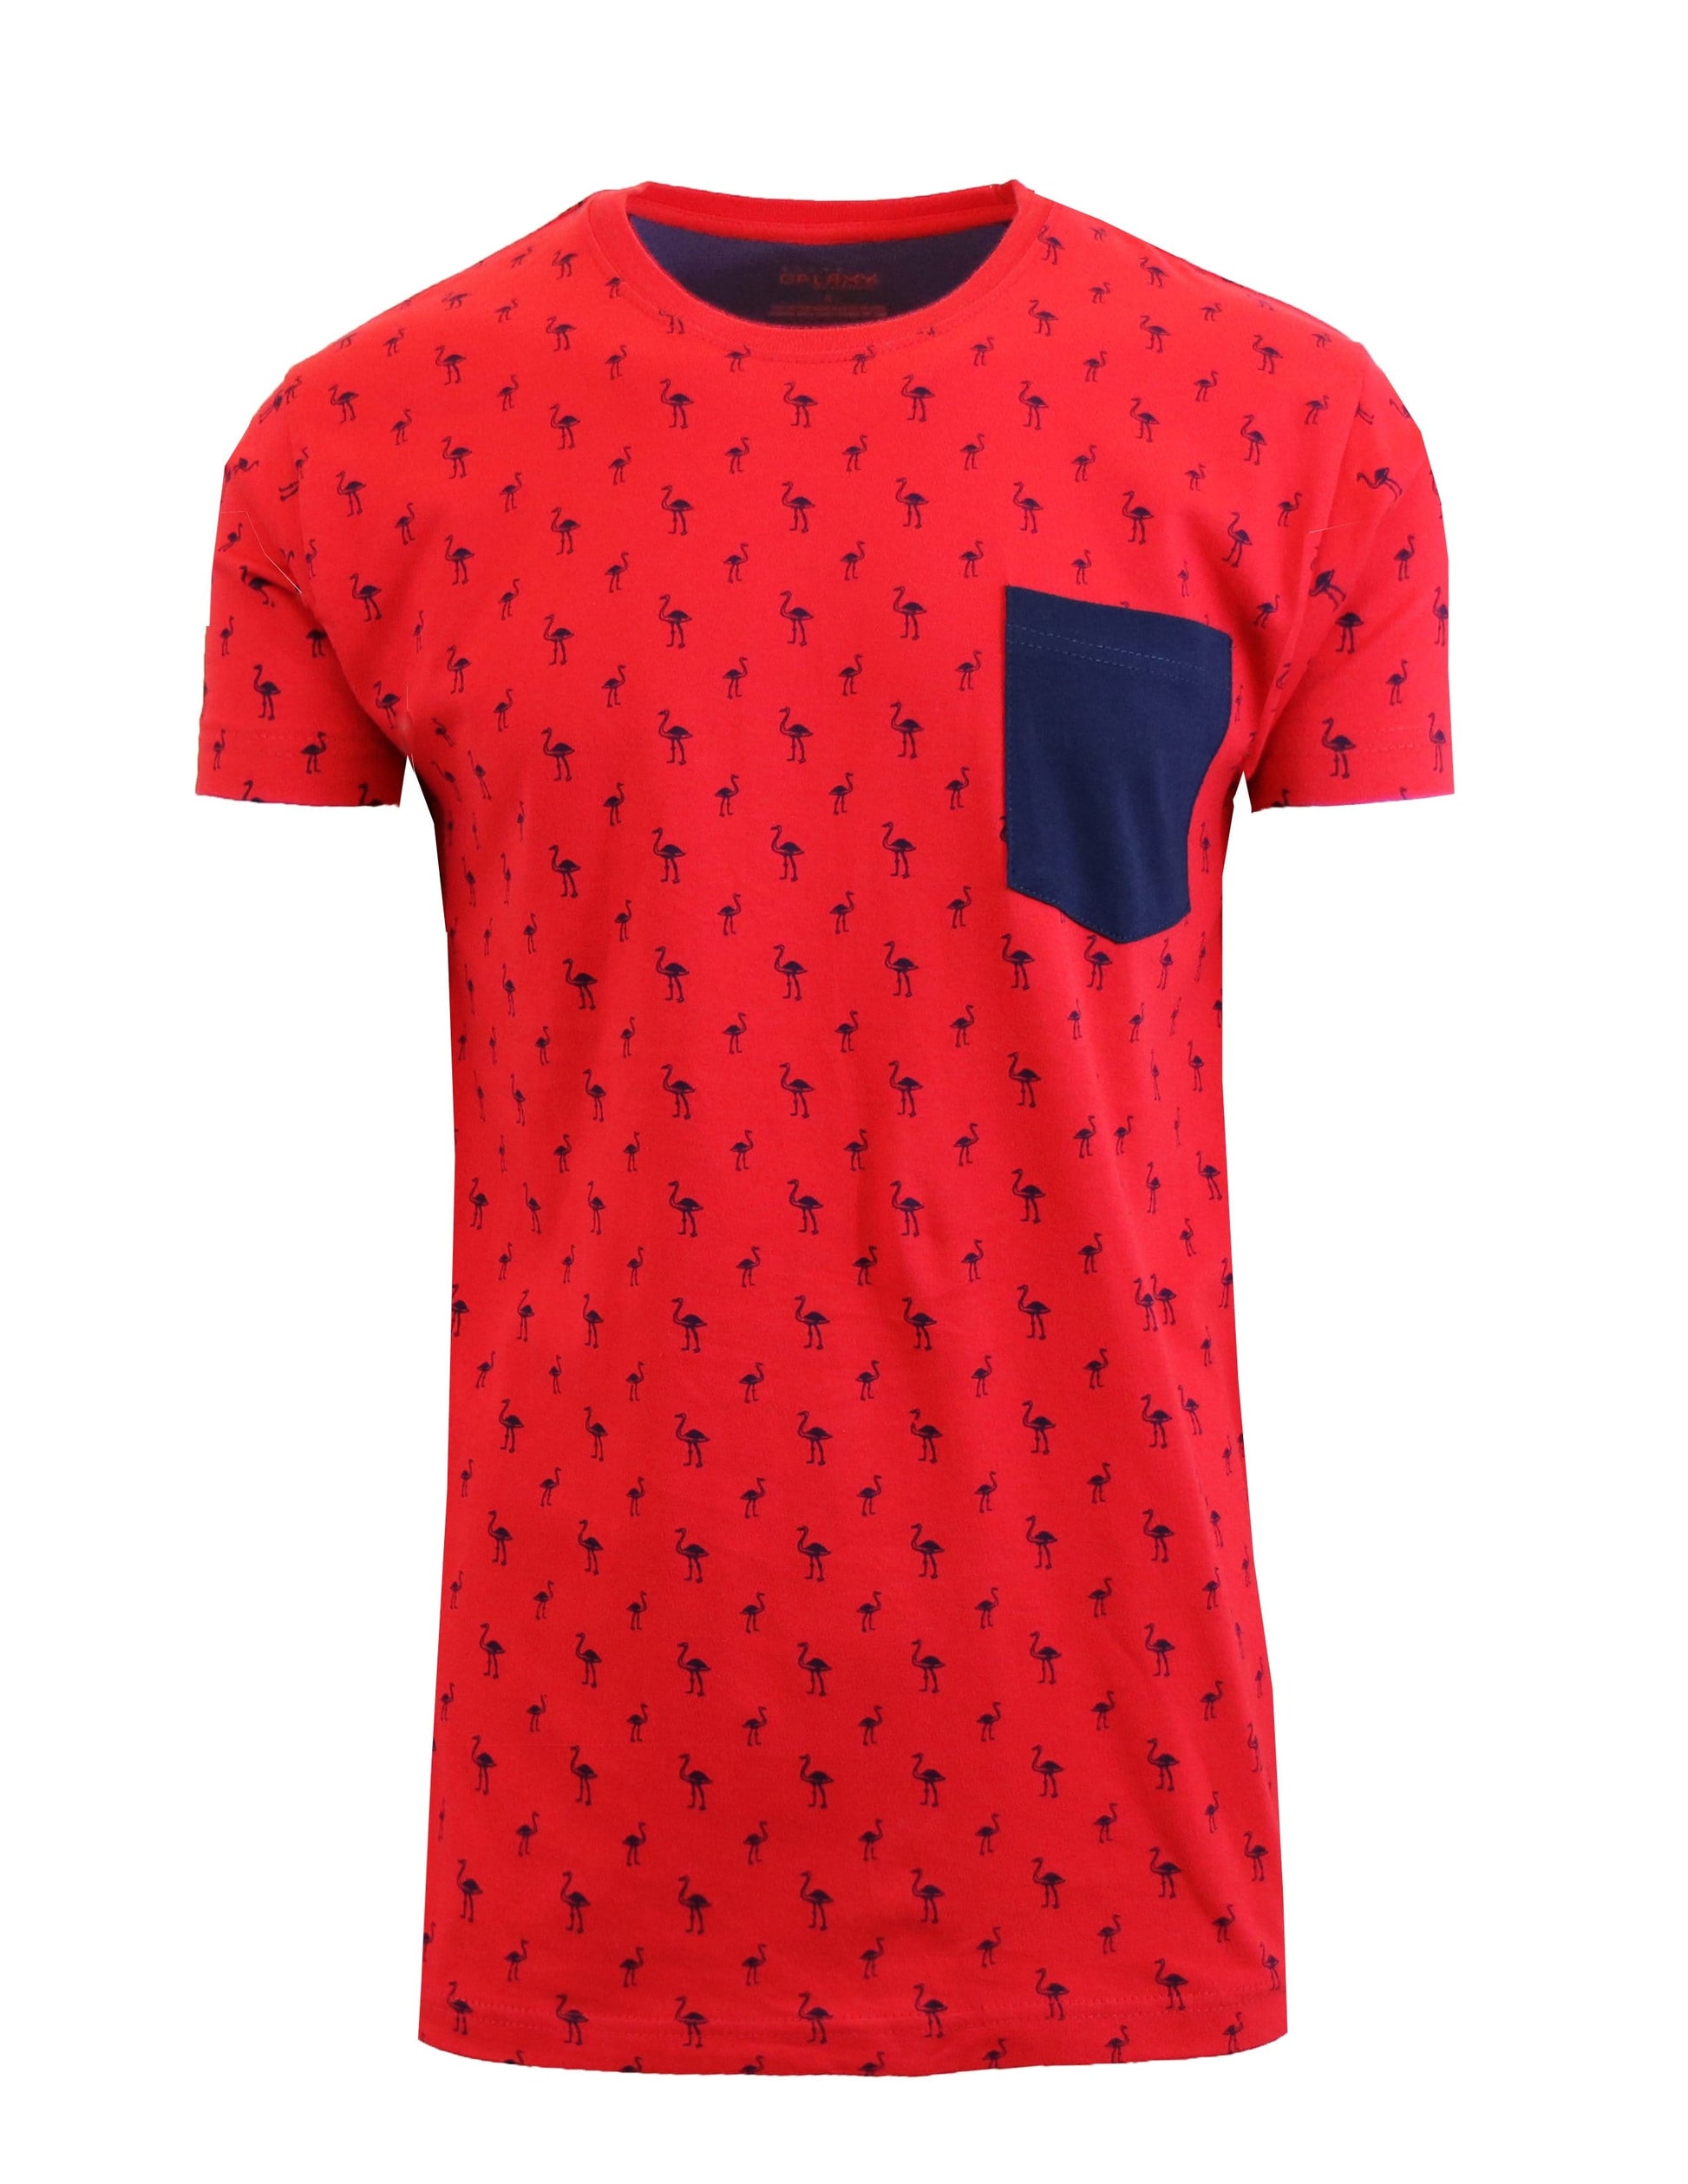 Men's Flamingo Printed Tee with Chest Pocket - GalaxybyHarvic